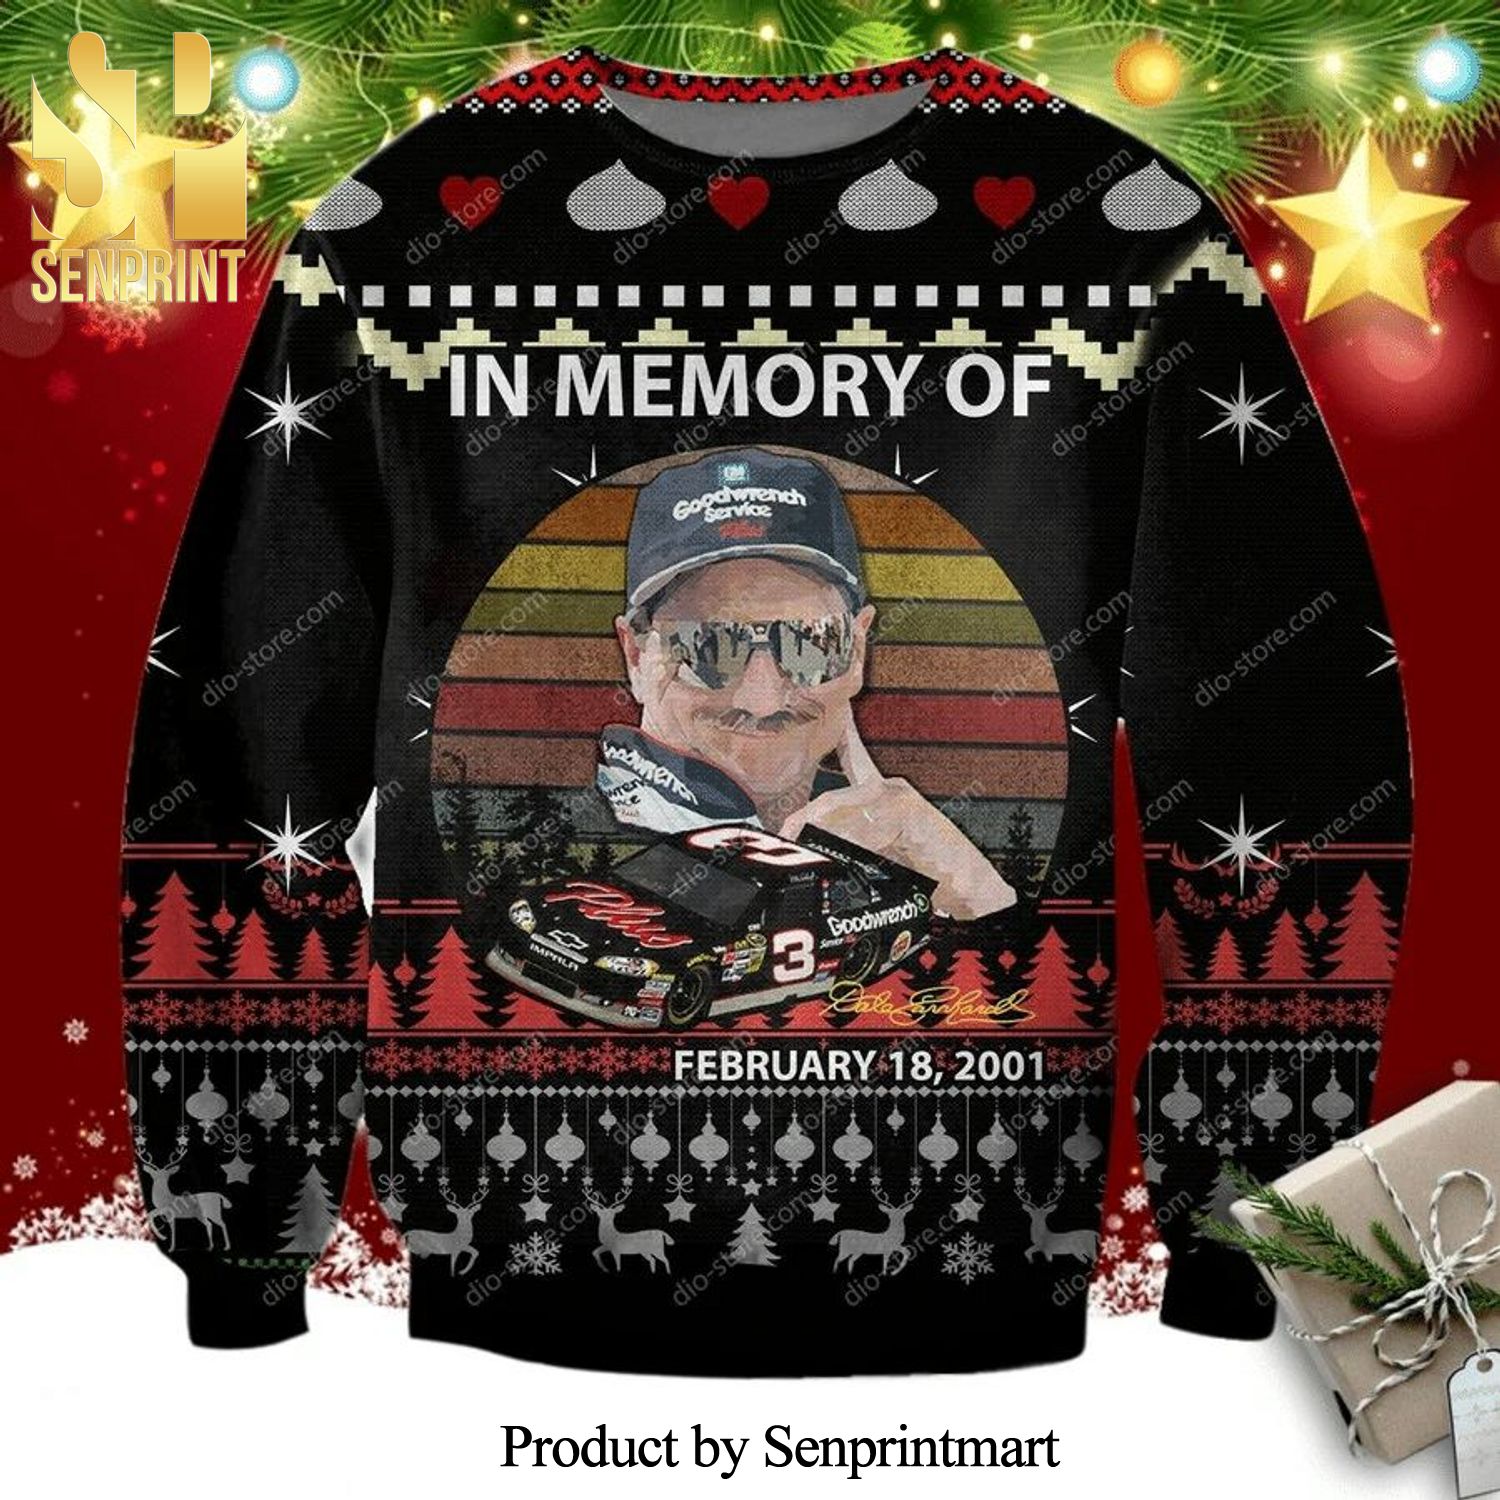 In Memory of Dale Earnhardt Richard Childress Racing Knitted Ugly Christmas Sweater